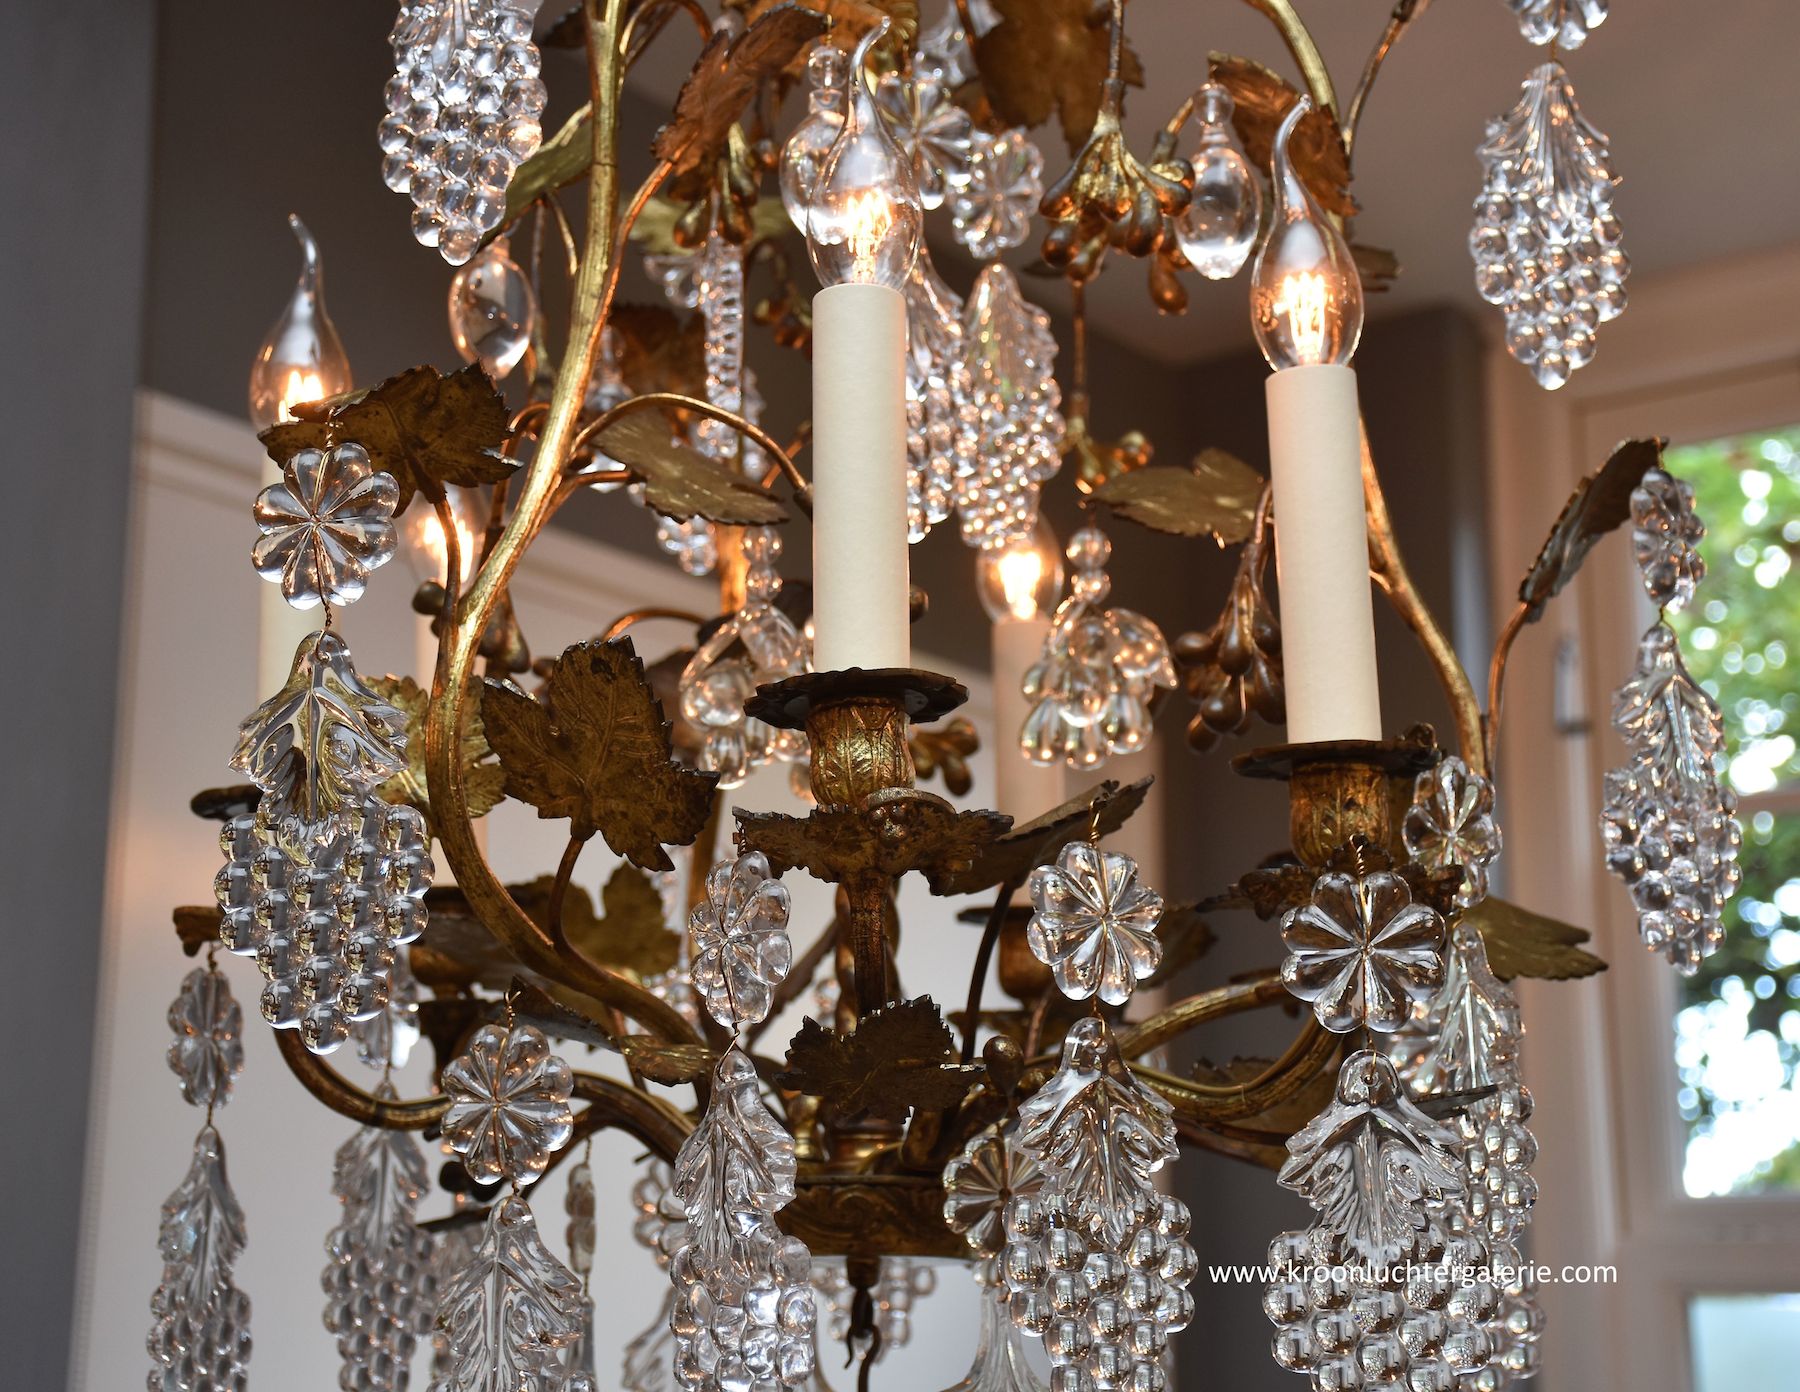 Gilt bronze French chandelier with 6 light